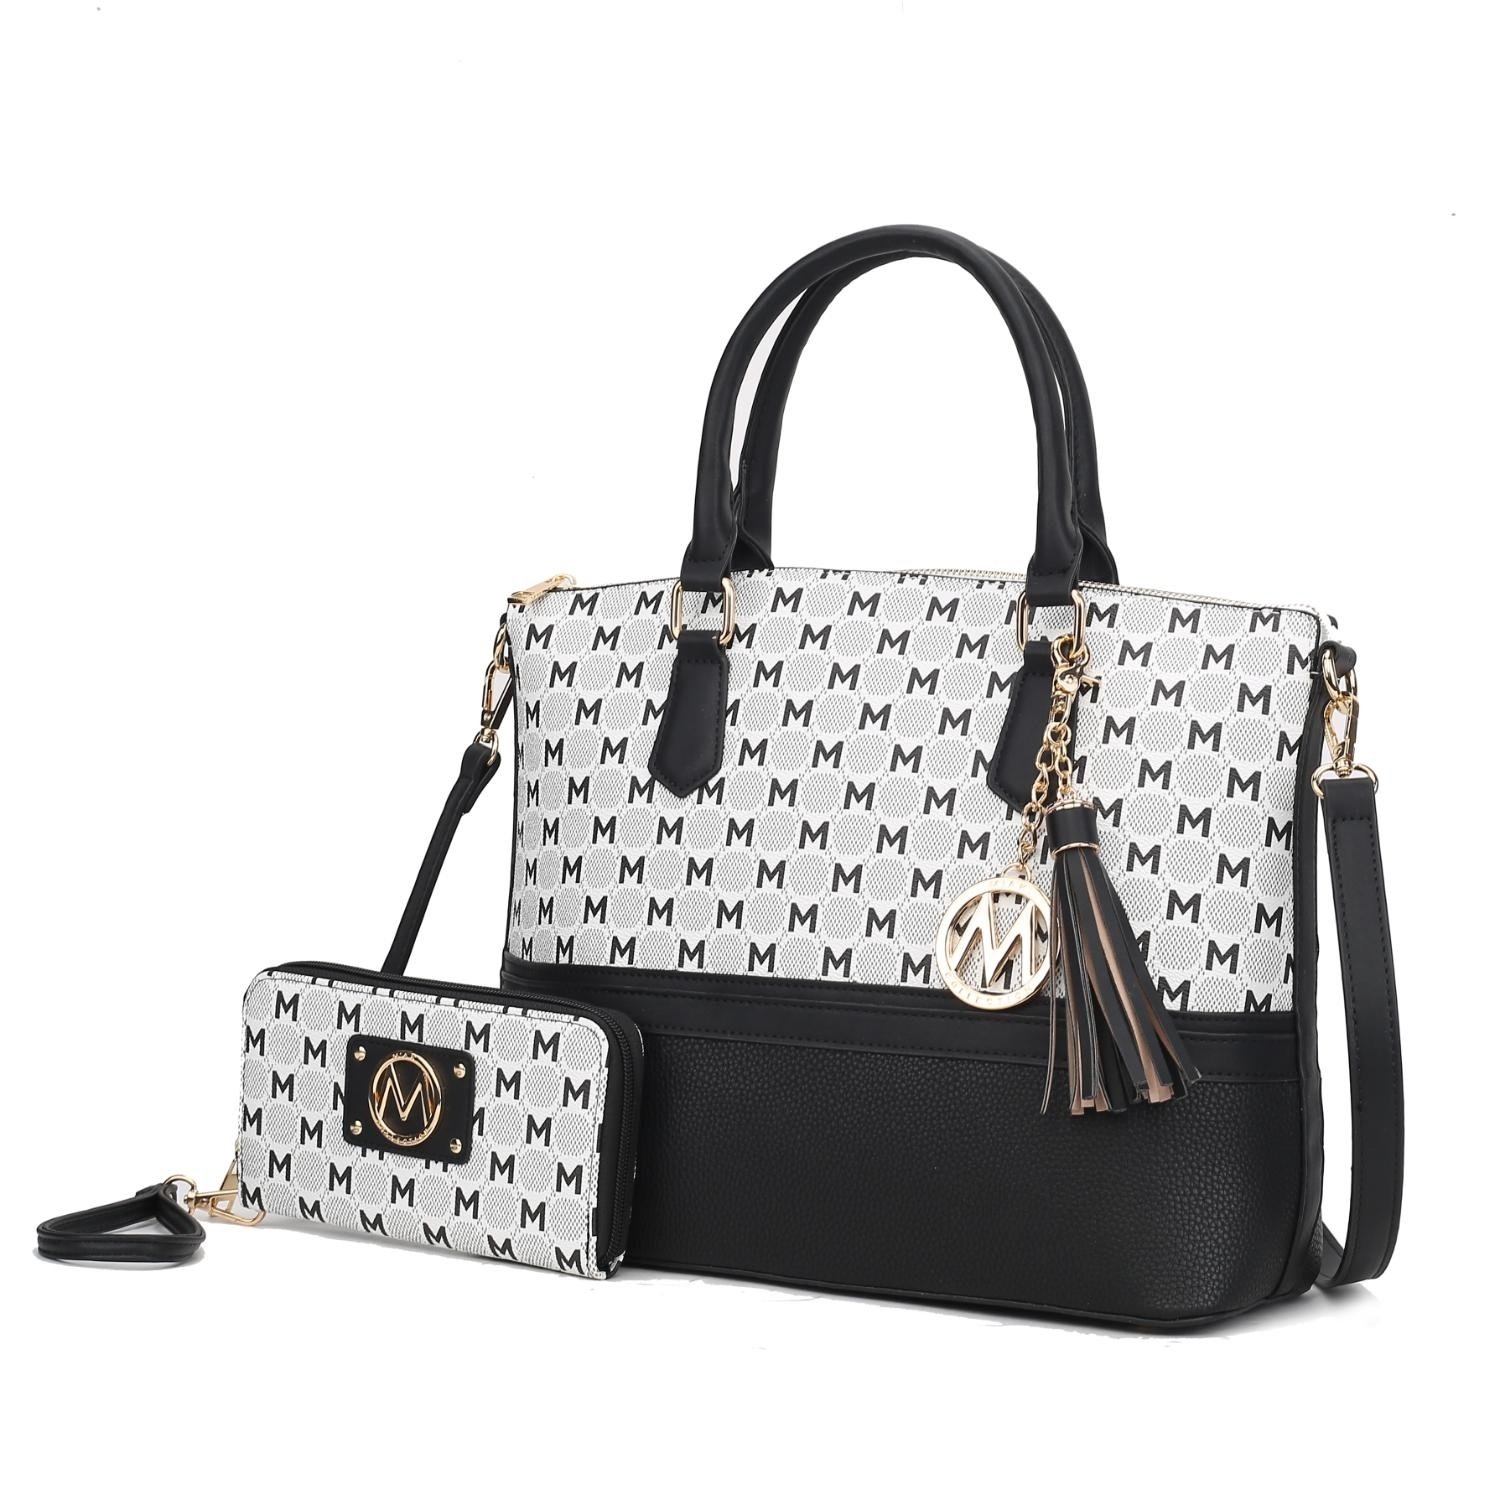 MKF Collection Saylor Circular M Emblem Print Women's Tote Bag With Matching Wristlet Wallet 2 Pieces By Mia K - Charcoal